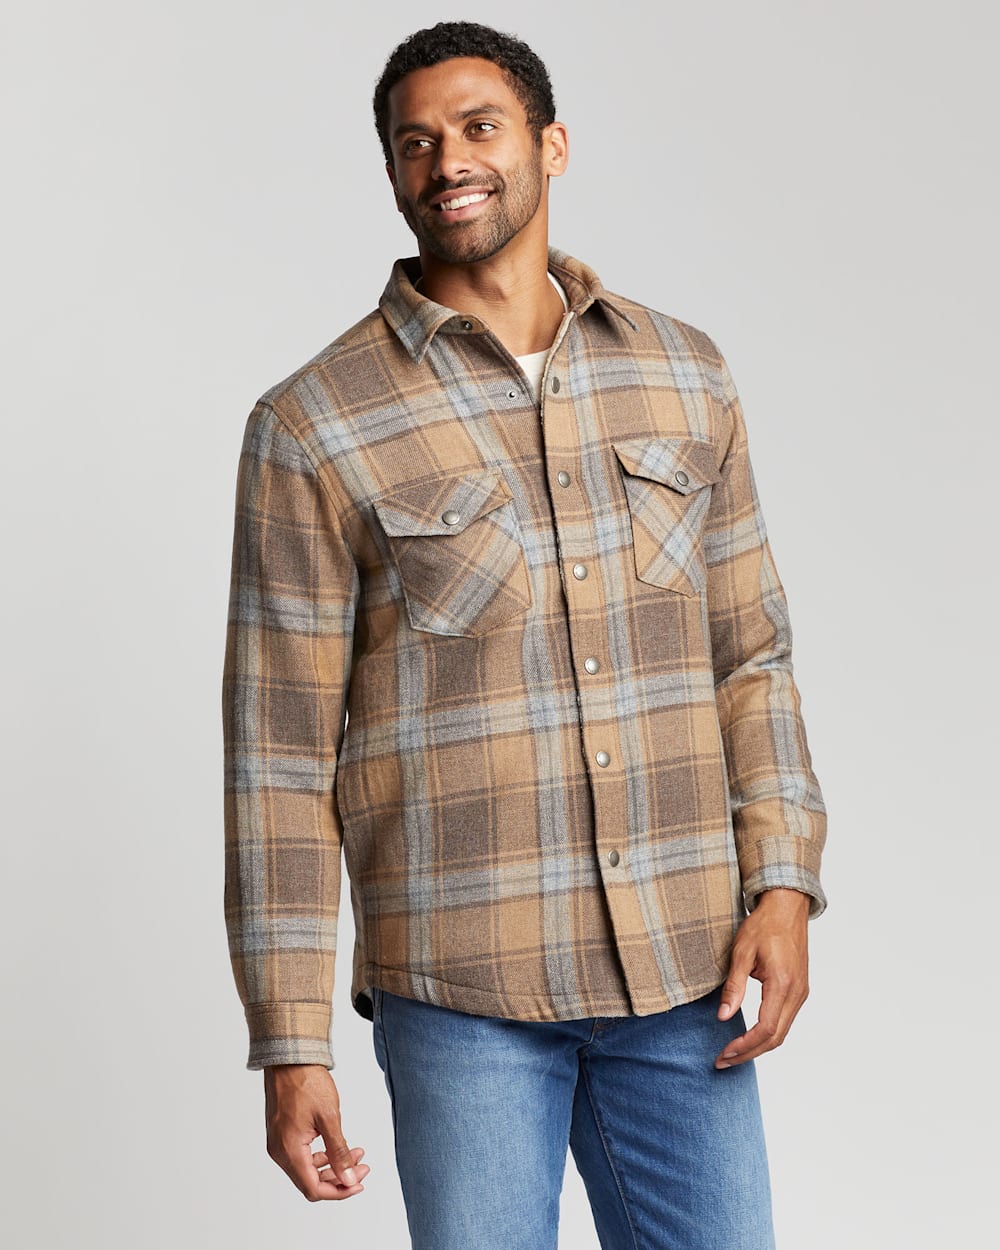 ALTERNATE VIEW OF MEN'S SHERPA-LINED WOOL SHIRT JACKET IN TAN/GREY PLAID image number 6